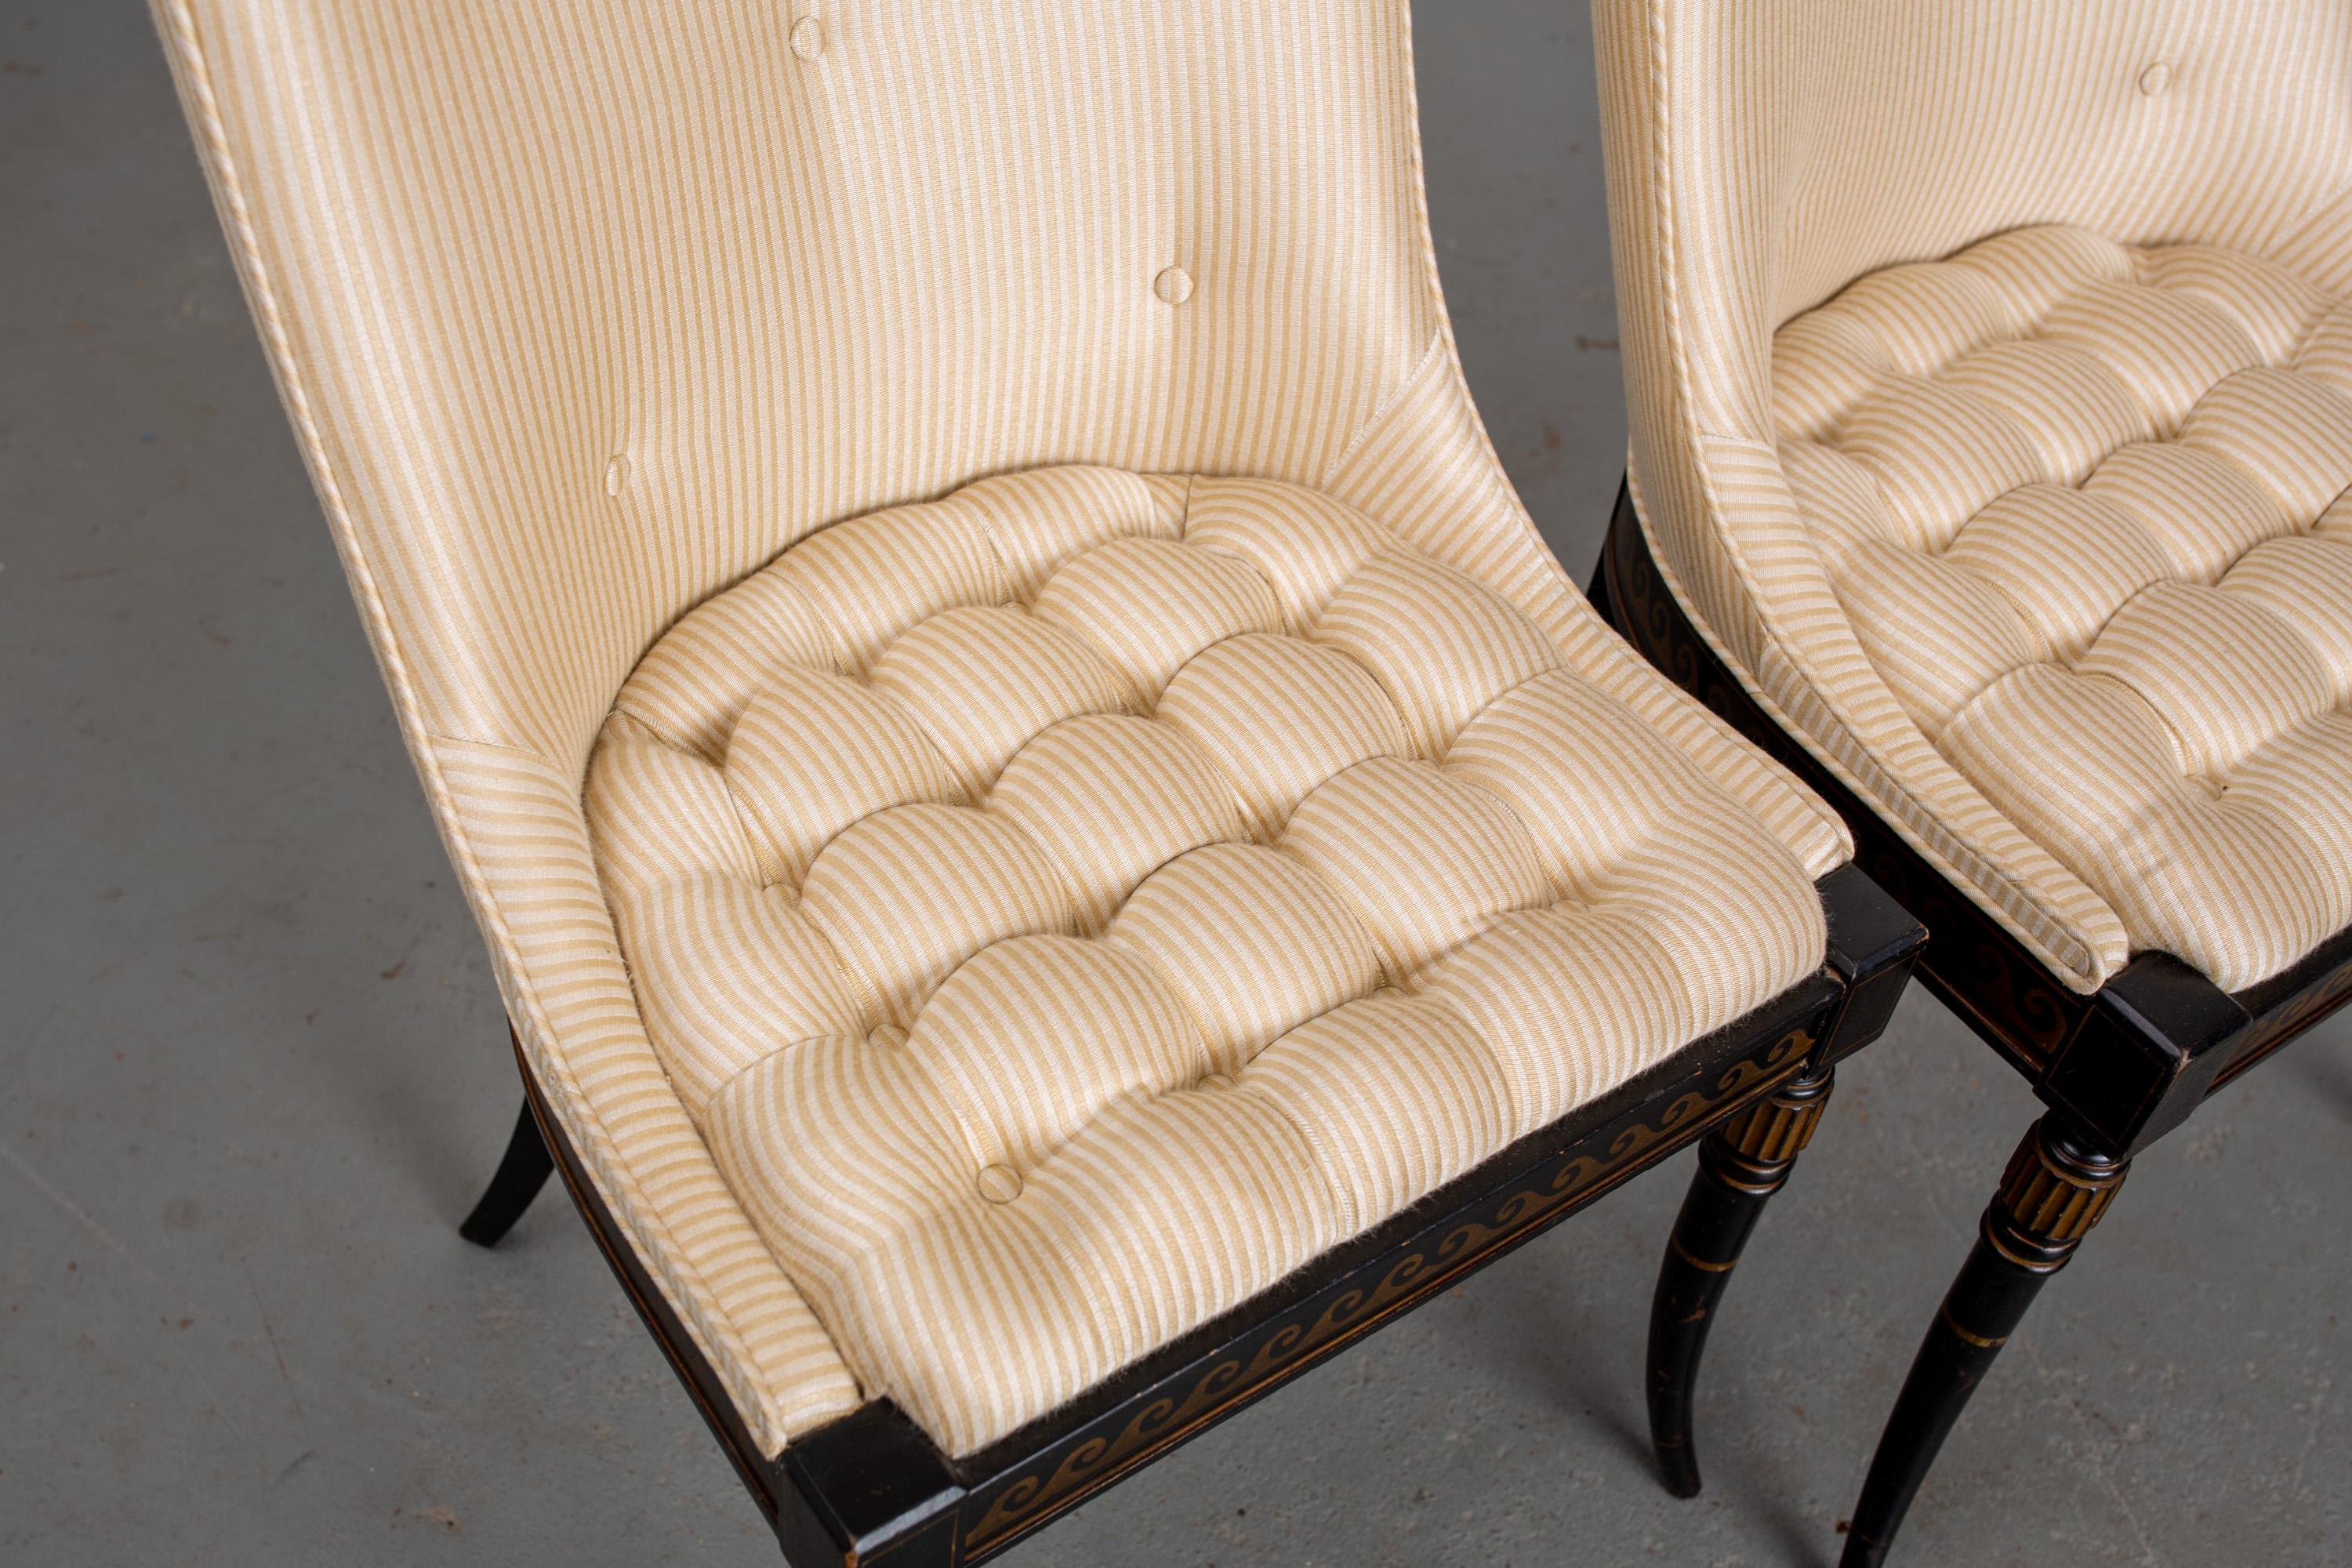 Pair of Regency style, newly upholstered, button-tufted side chairs with black painted frame and carved wood legs with parcel-gilt.